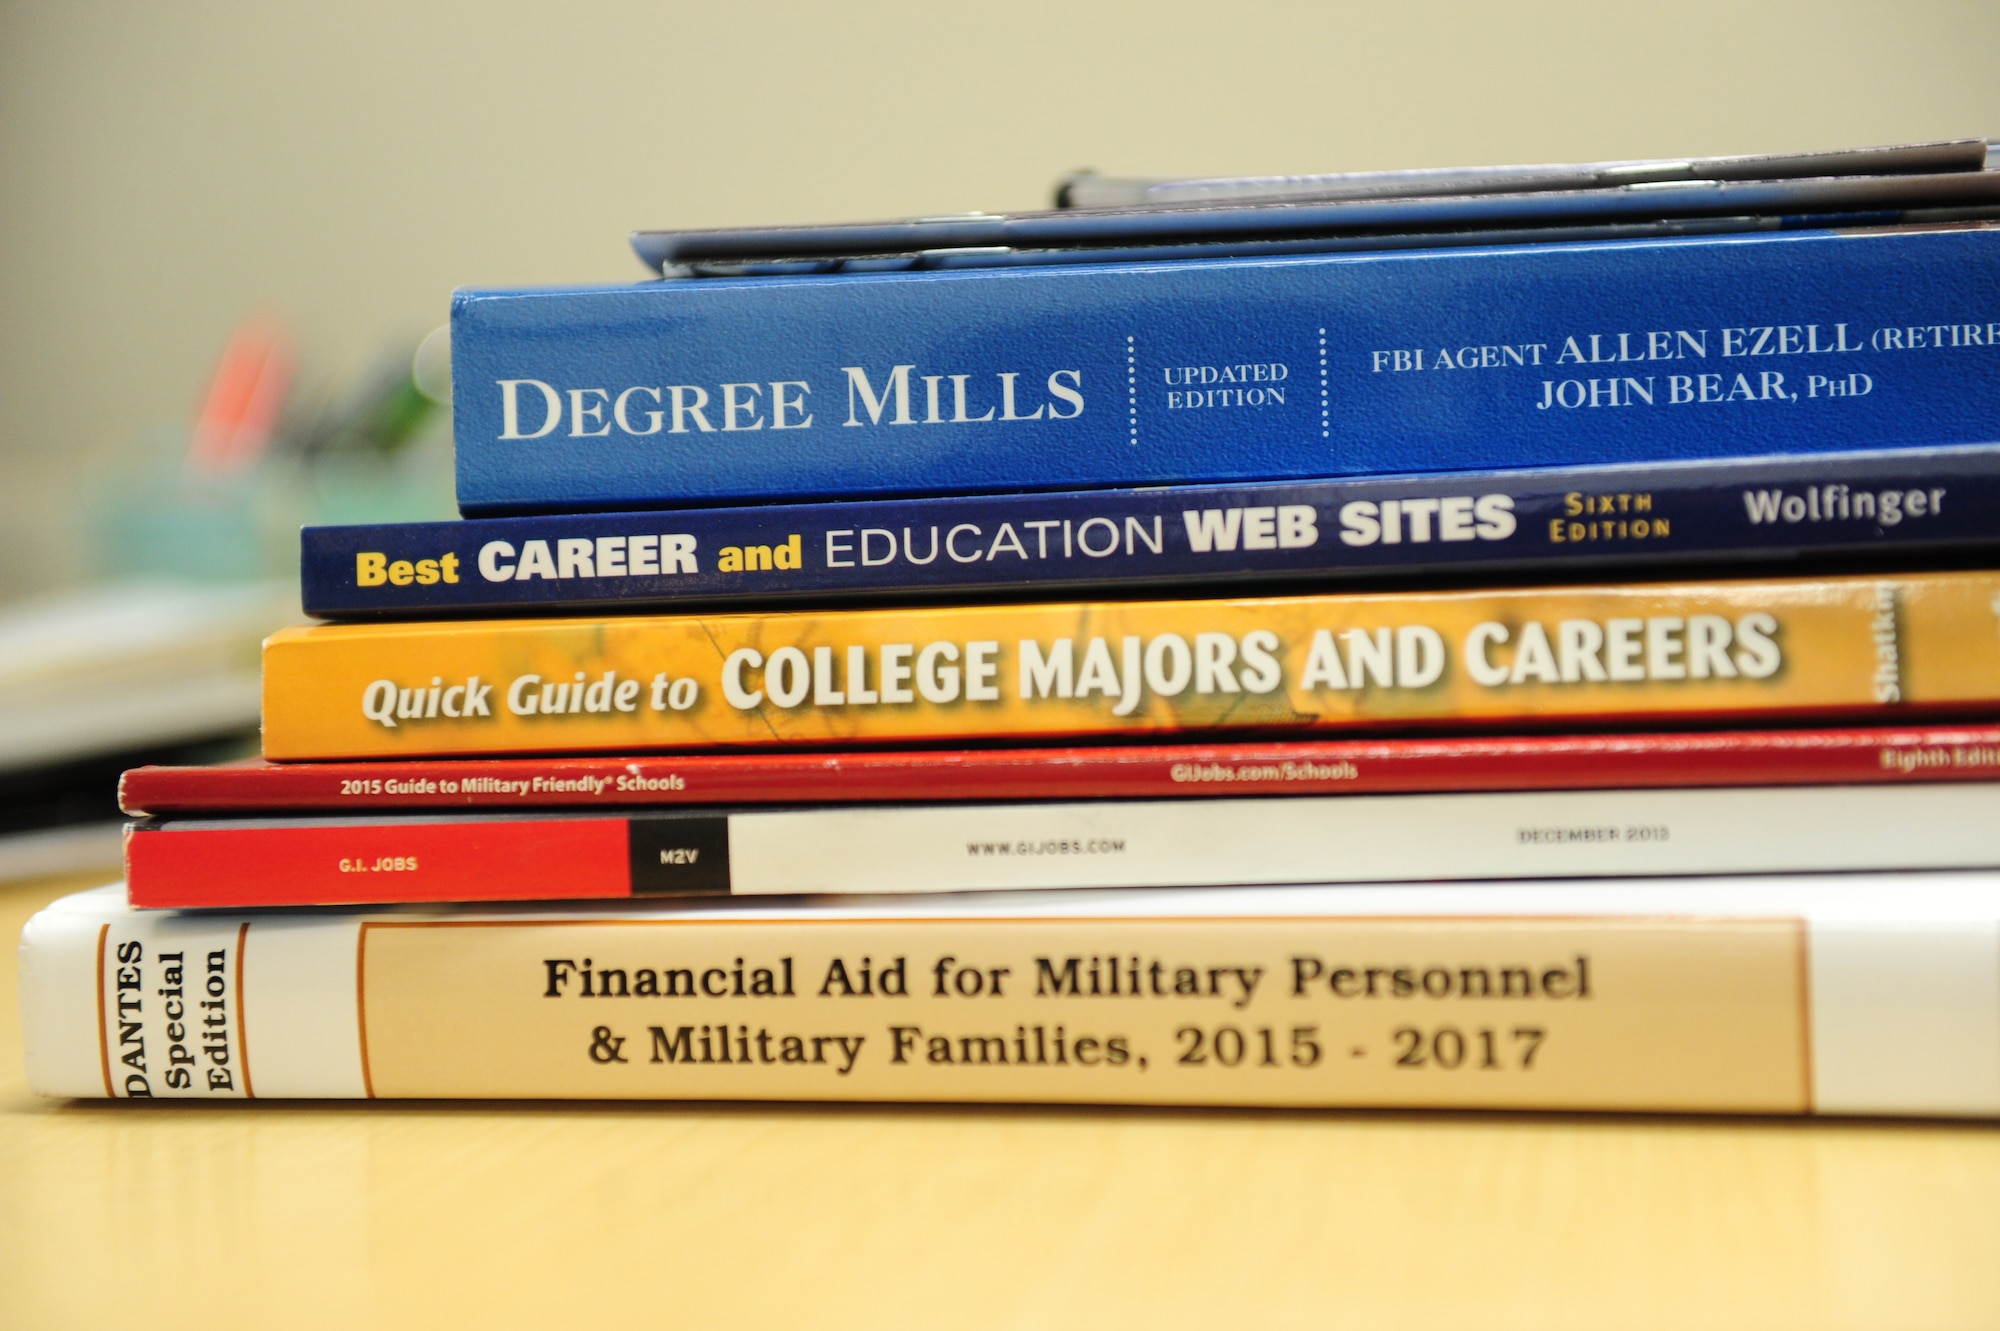 An array of resources with information on scholarships and other educational information are available to service members and their families at Whiteman Air Force Base, Mo. With hundreds of scholarships and grants available, dependents can speak to counselors at the Airman and Family Readiness Center or the Professional Development Center on how to go to school at little to no cost to themselves. (U.S. Air Force photo by Airman 1st Class Jazmin Smith/Released)